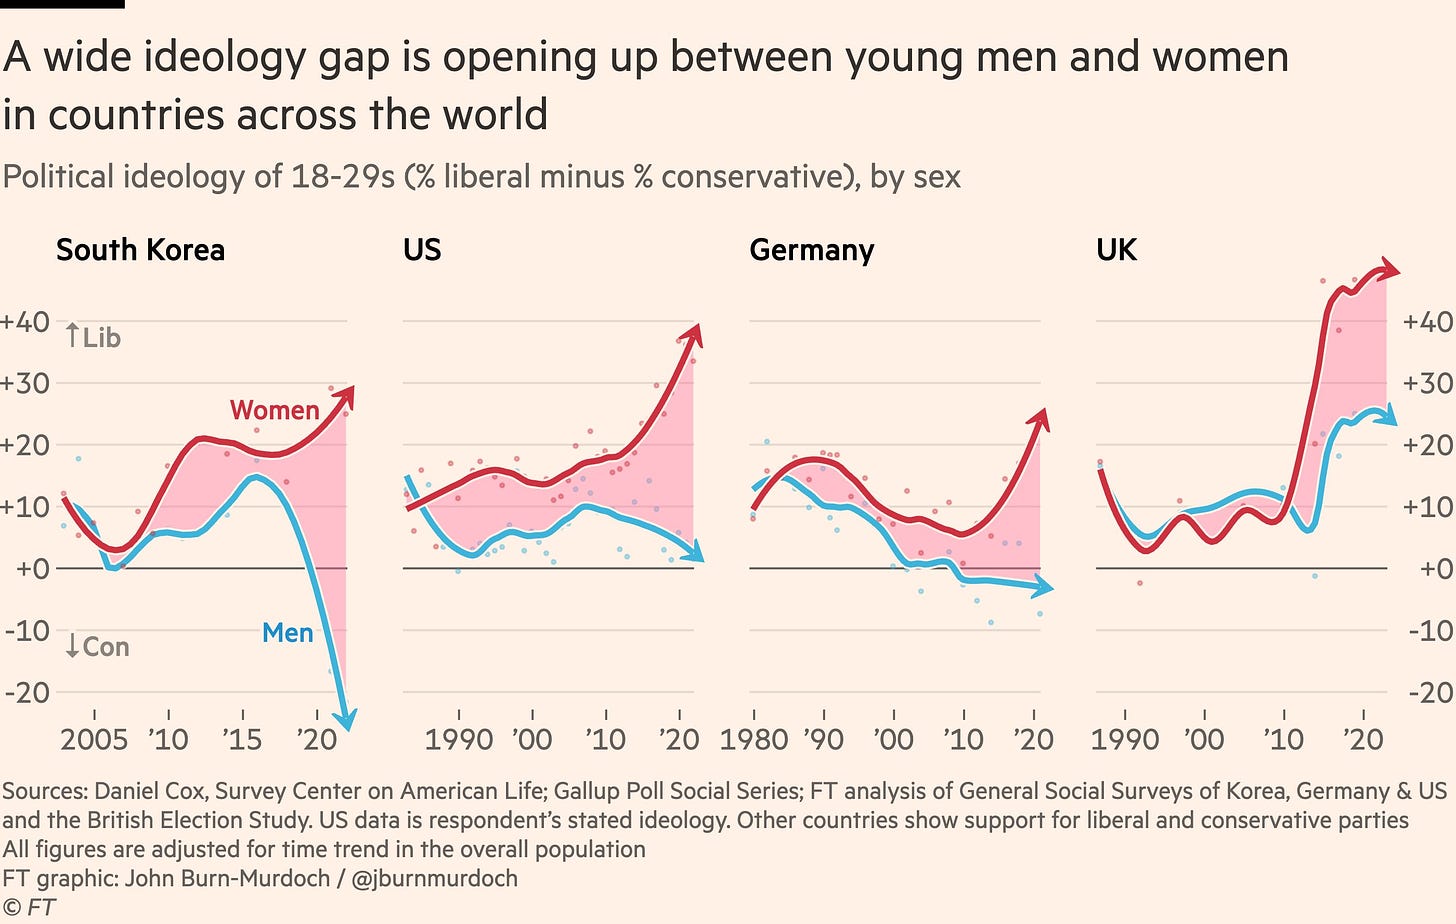 Charts show a wide ideology gap opening up between young men and women across South Korea, US, Germany and UK